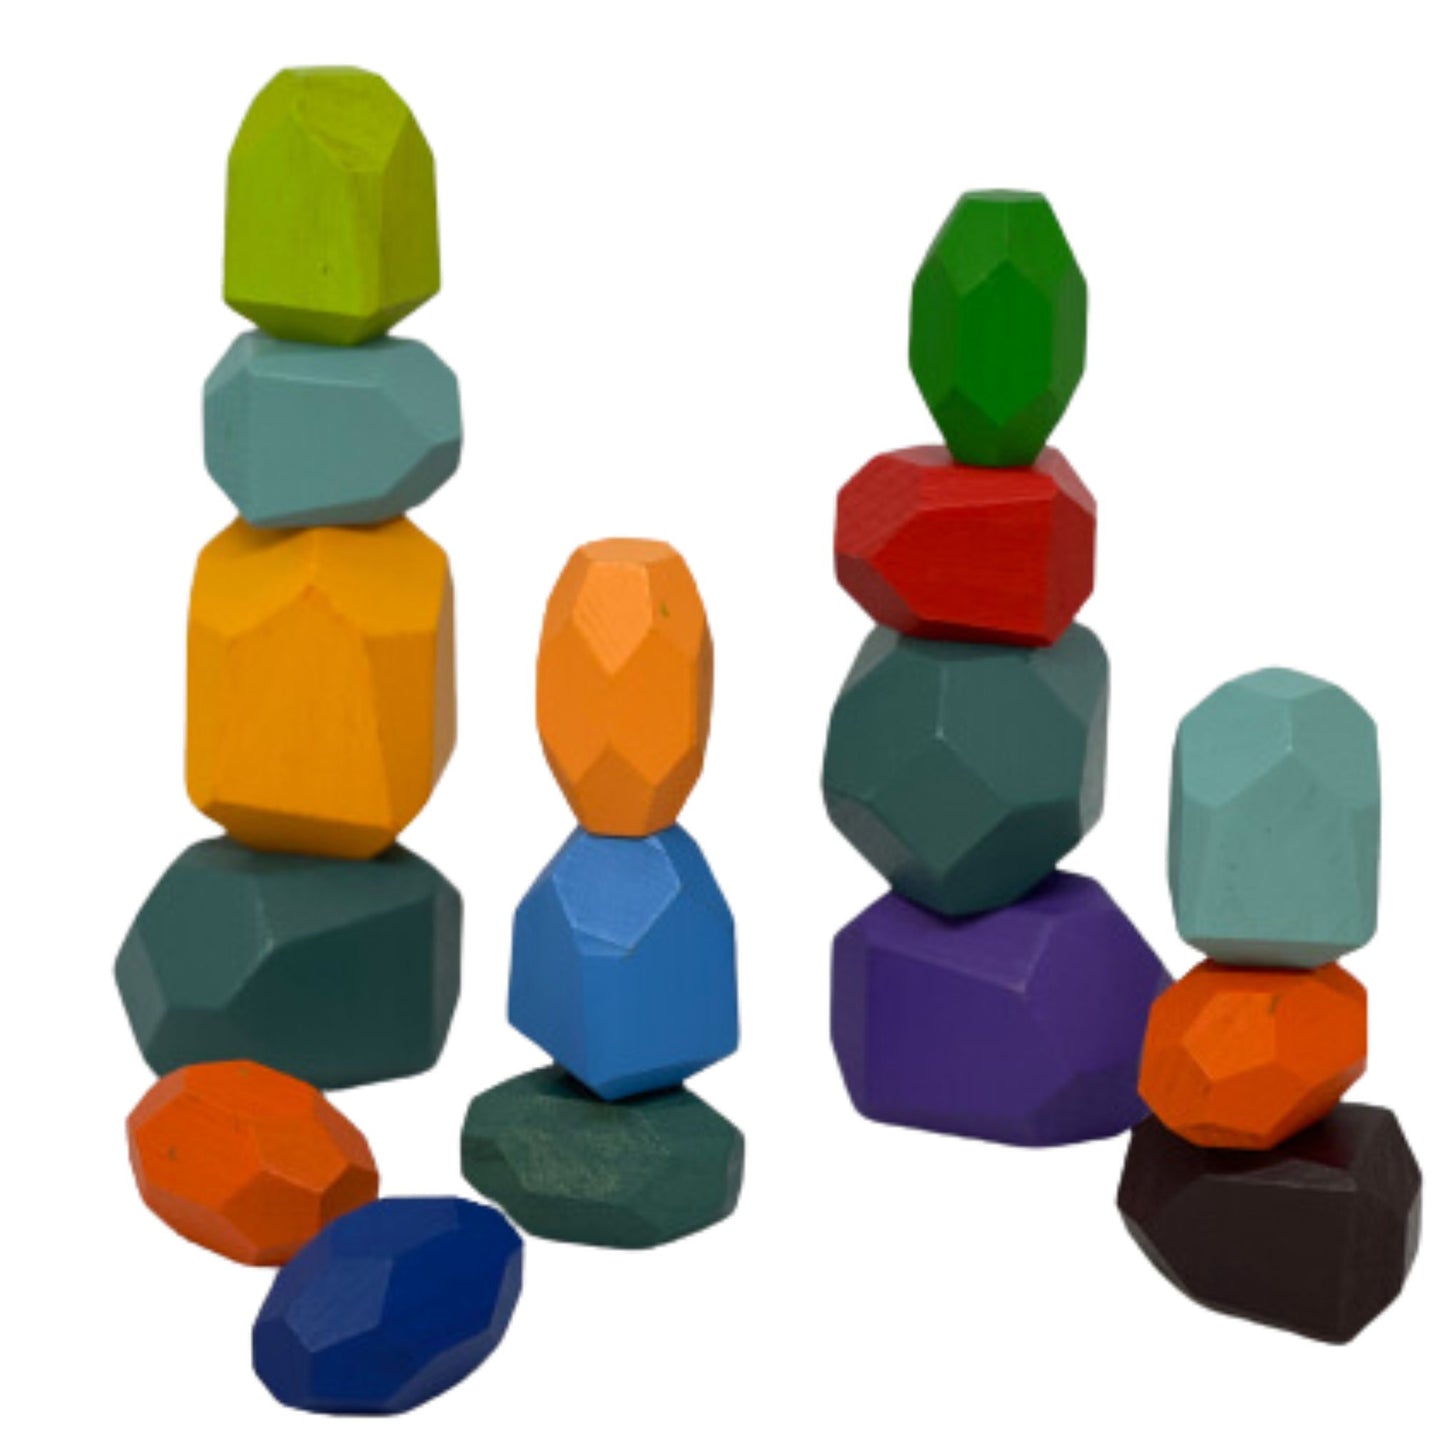 Multicoloured wooden balancing gems game